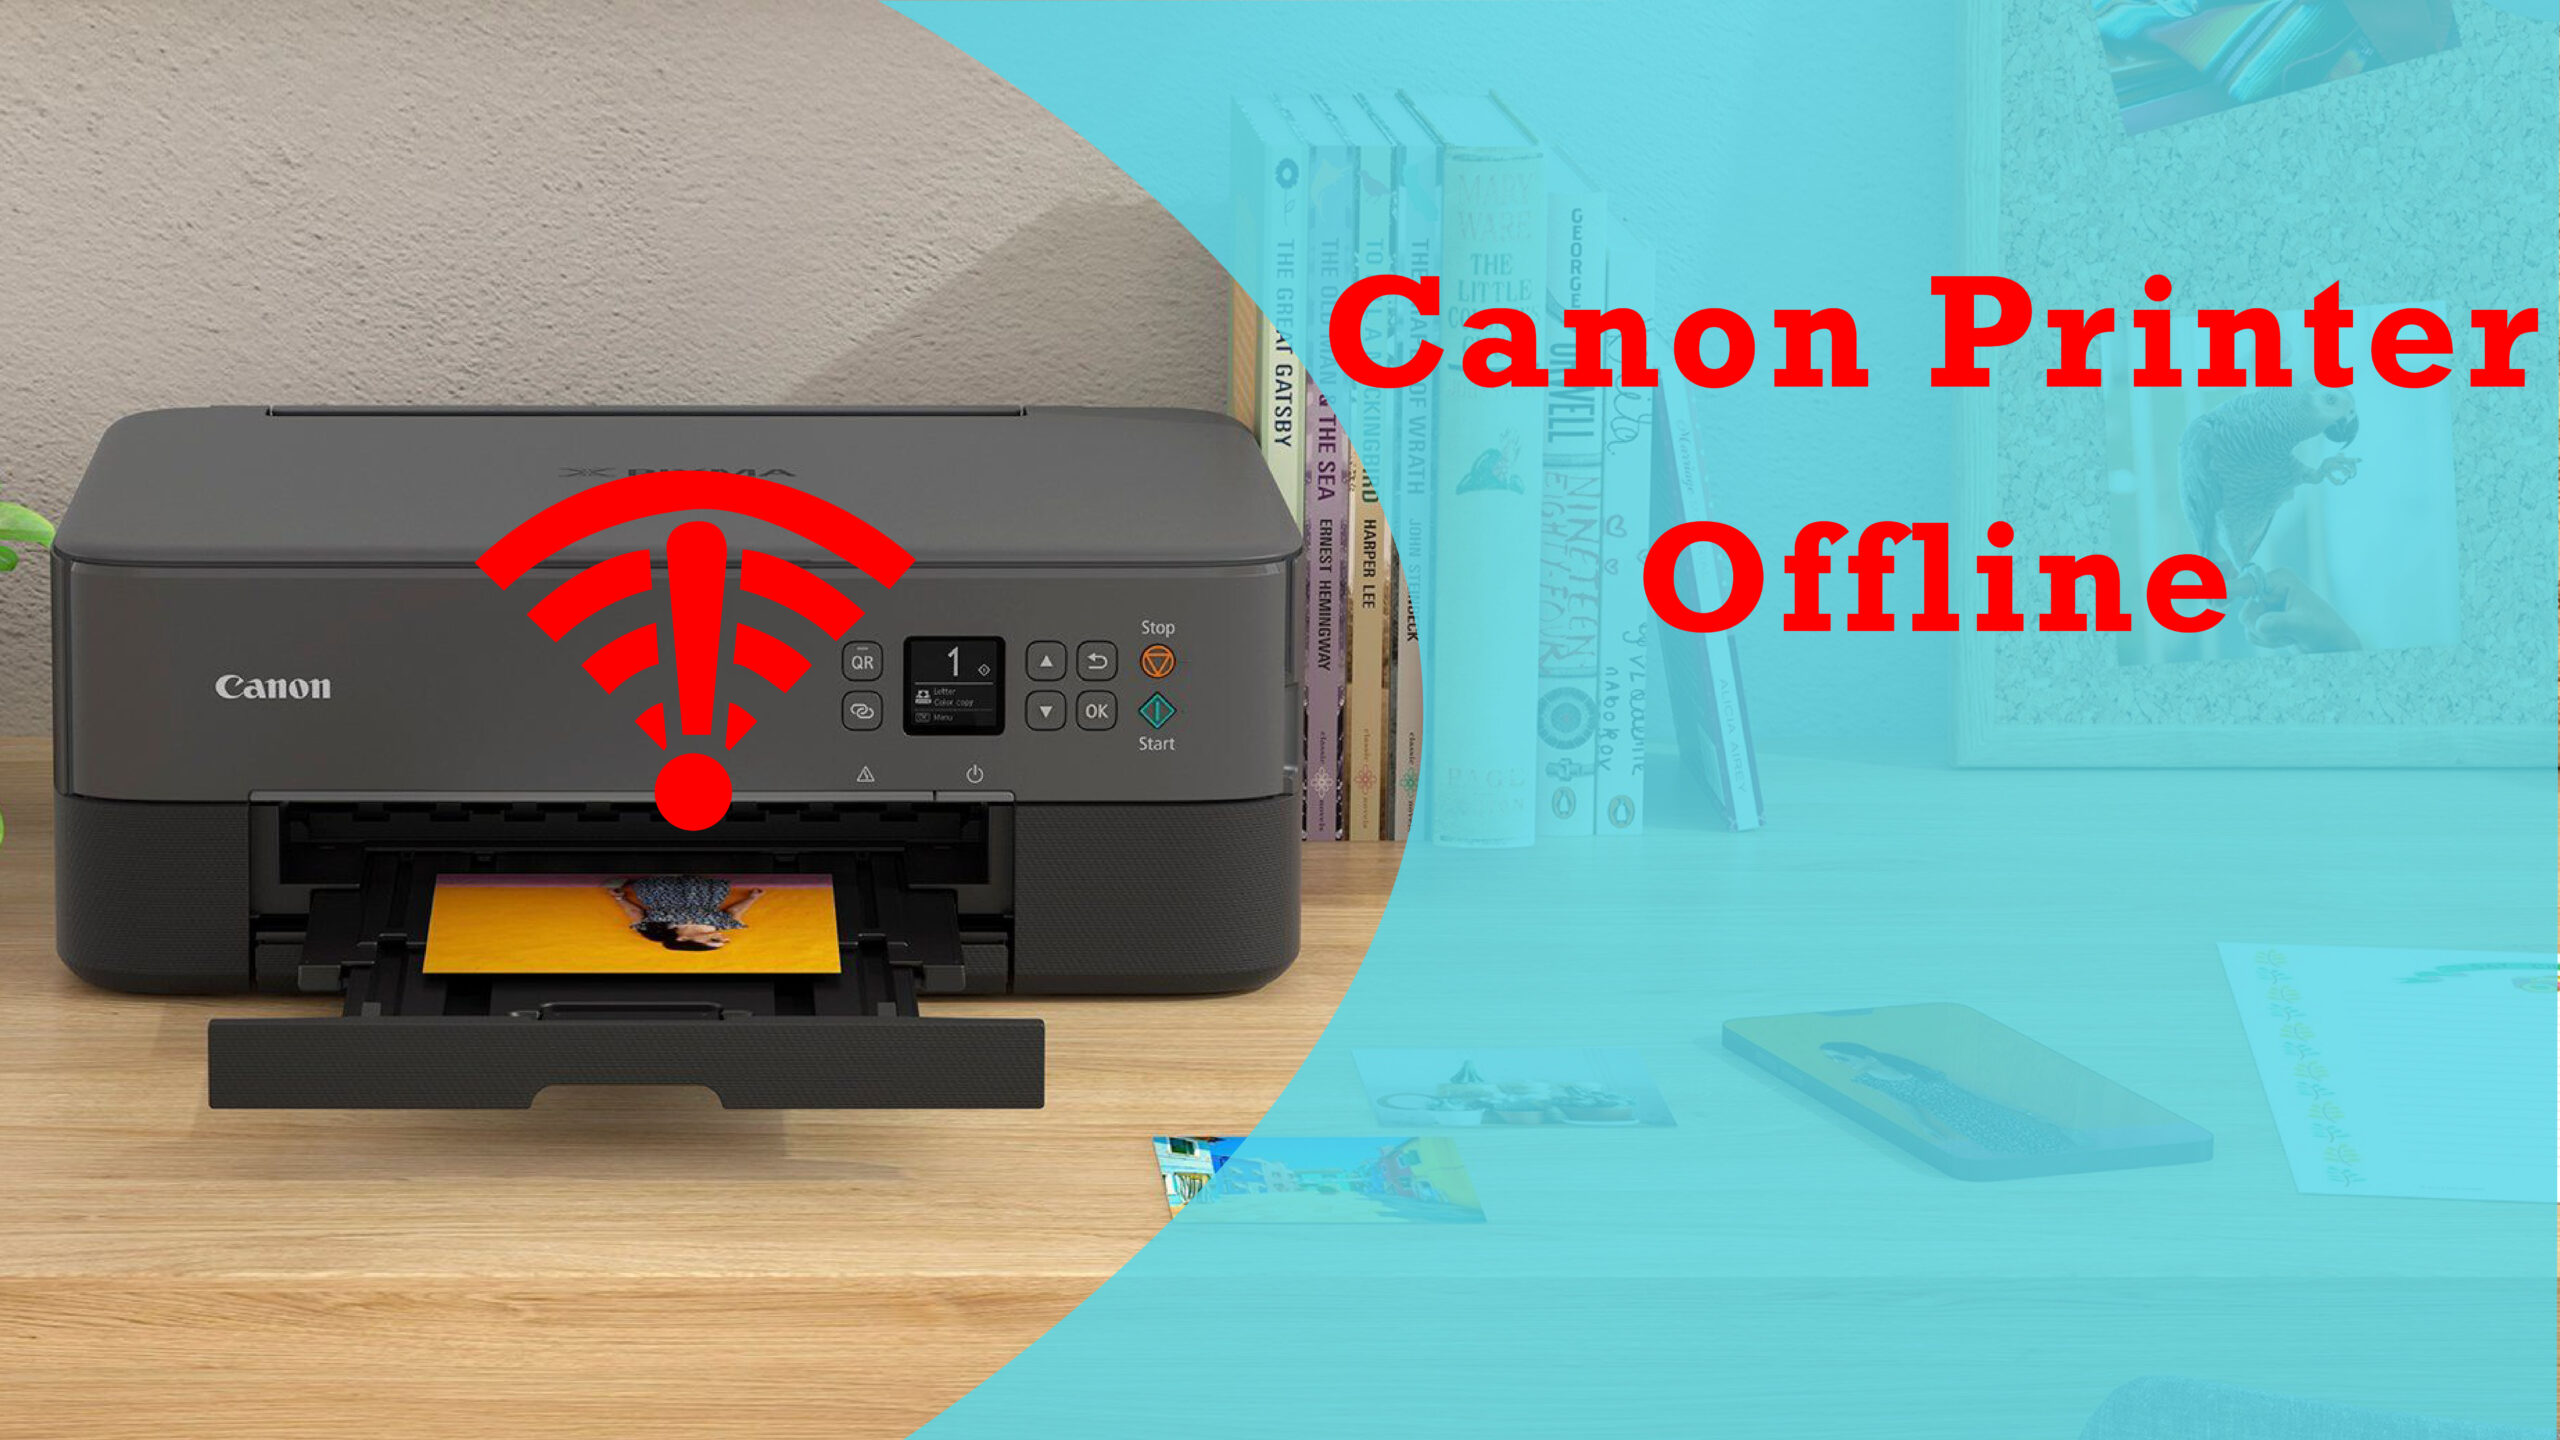 Reliable Solutions for the Canon Printer Offline Issue